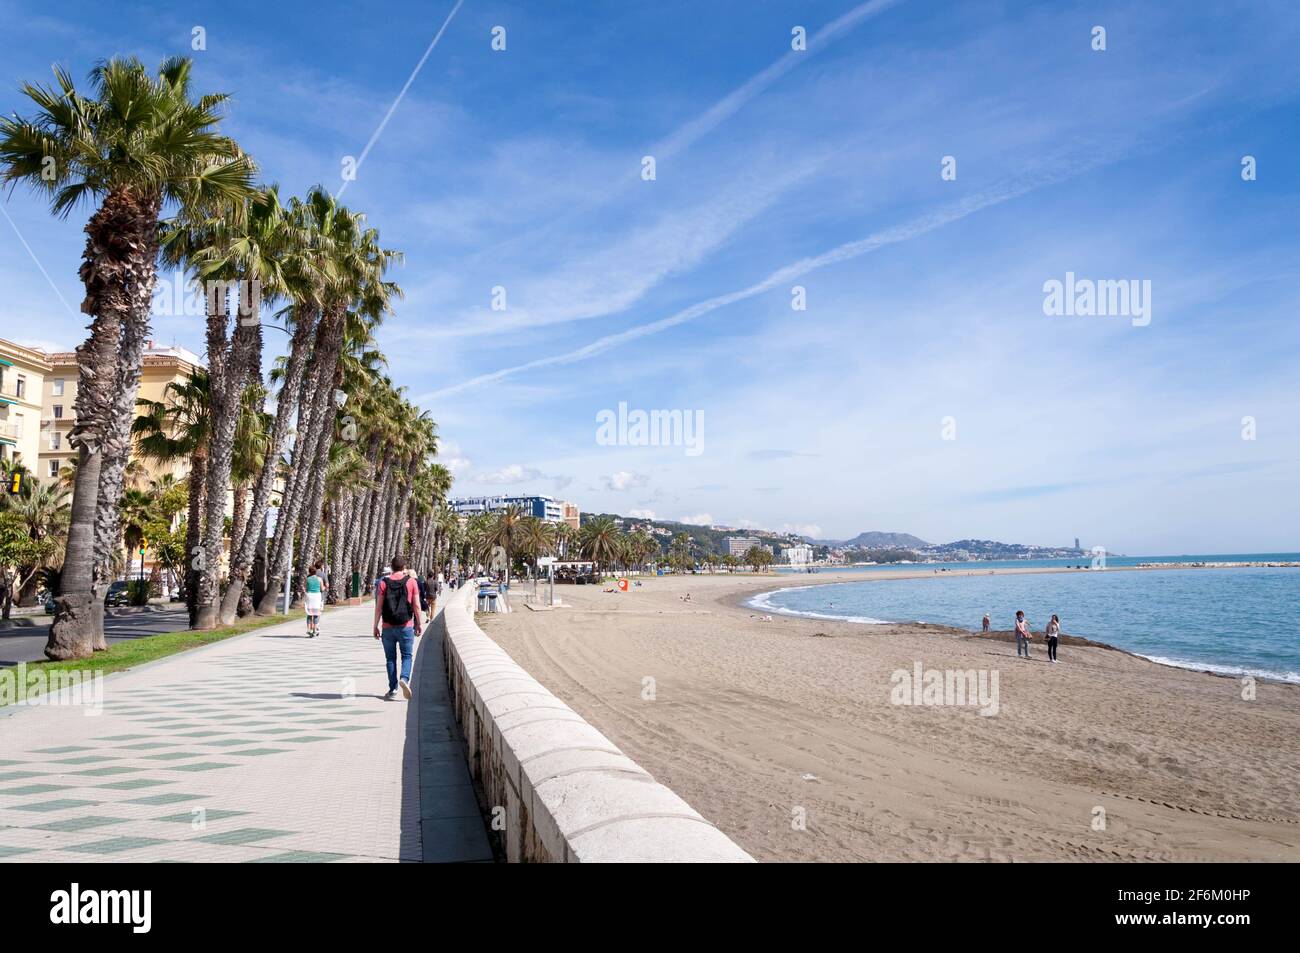 Palms, blue sky and lots of sunshine in Malaga, Spain Stock Photo